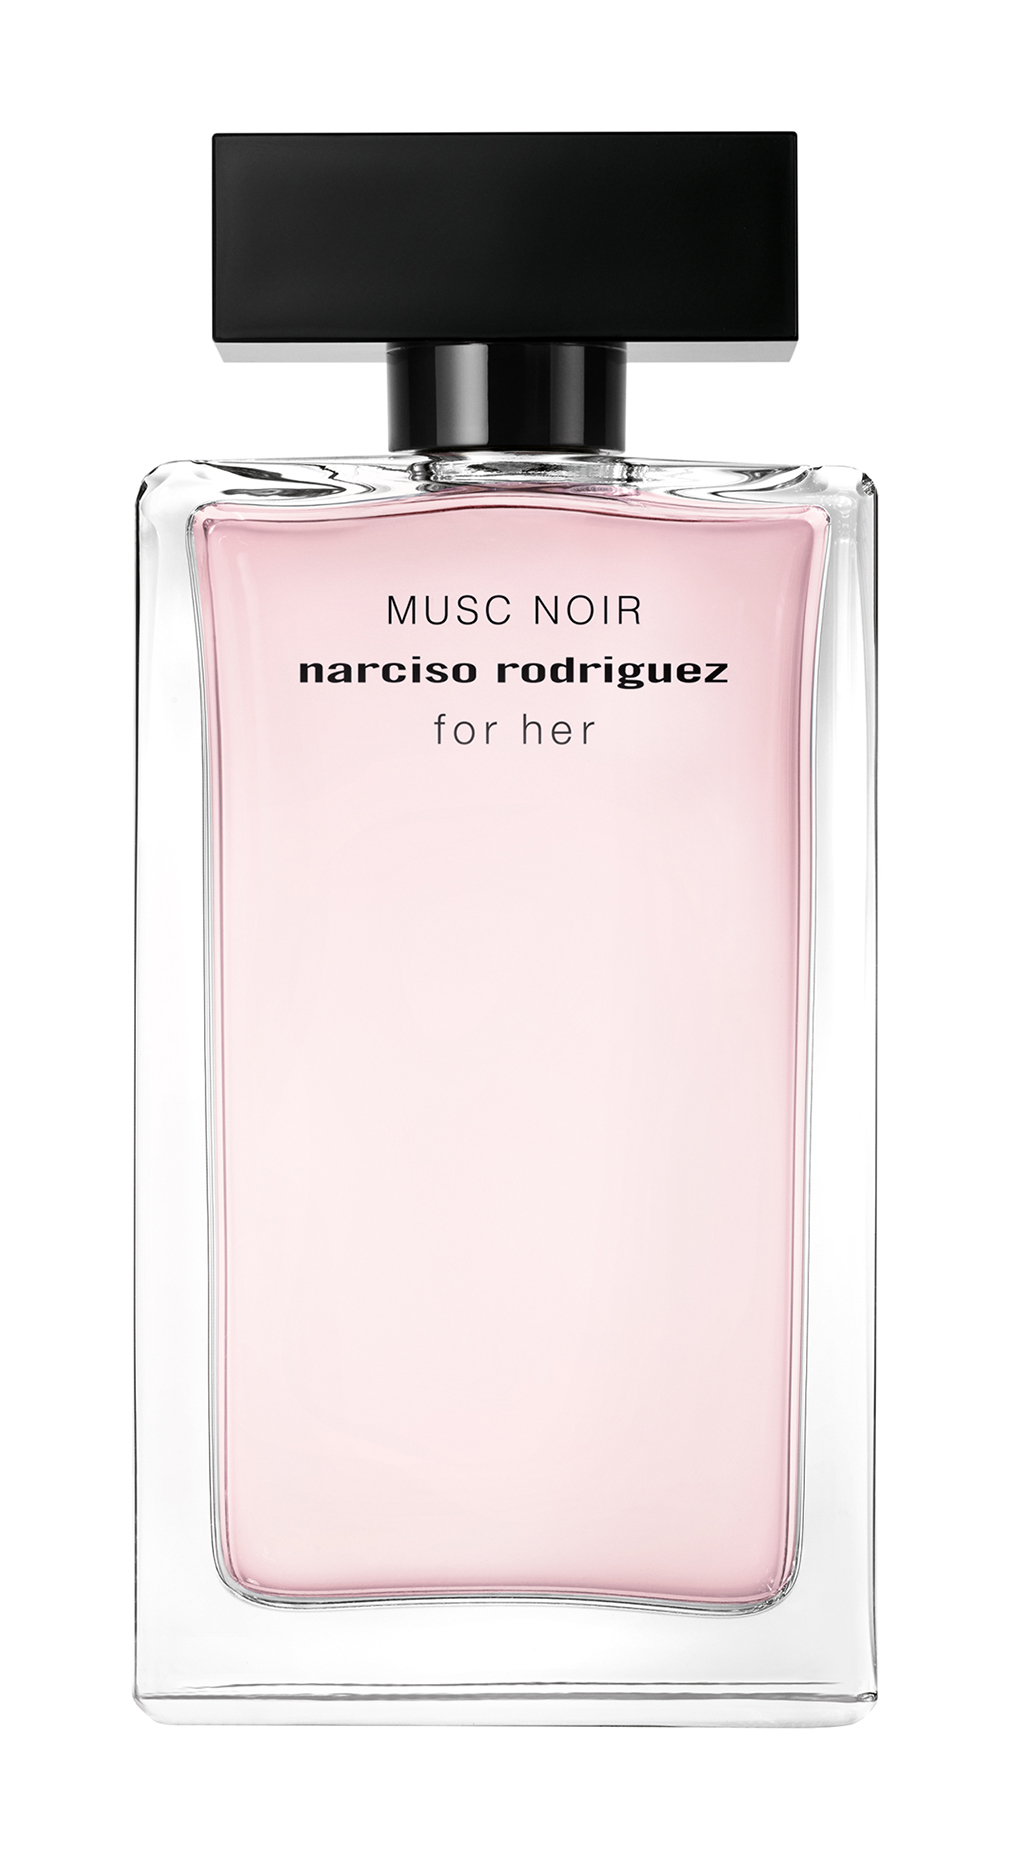 Narciso Rodriguez for her. Narciso Rodriguez Musc for her. Narciso Rodriguez for her Eau de Parfum парфюмерная вода 100 мл. Narciso Rodriguez Narciso. Narciso rodriguez musc купить